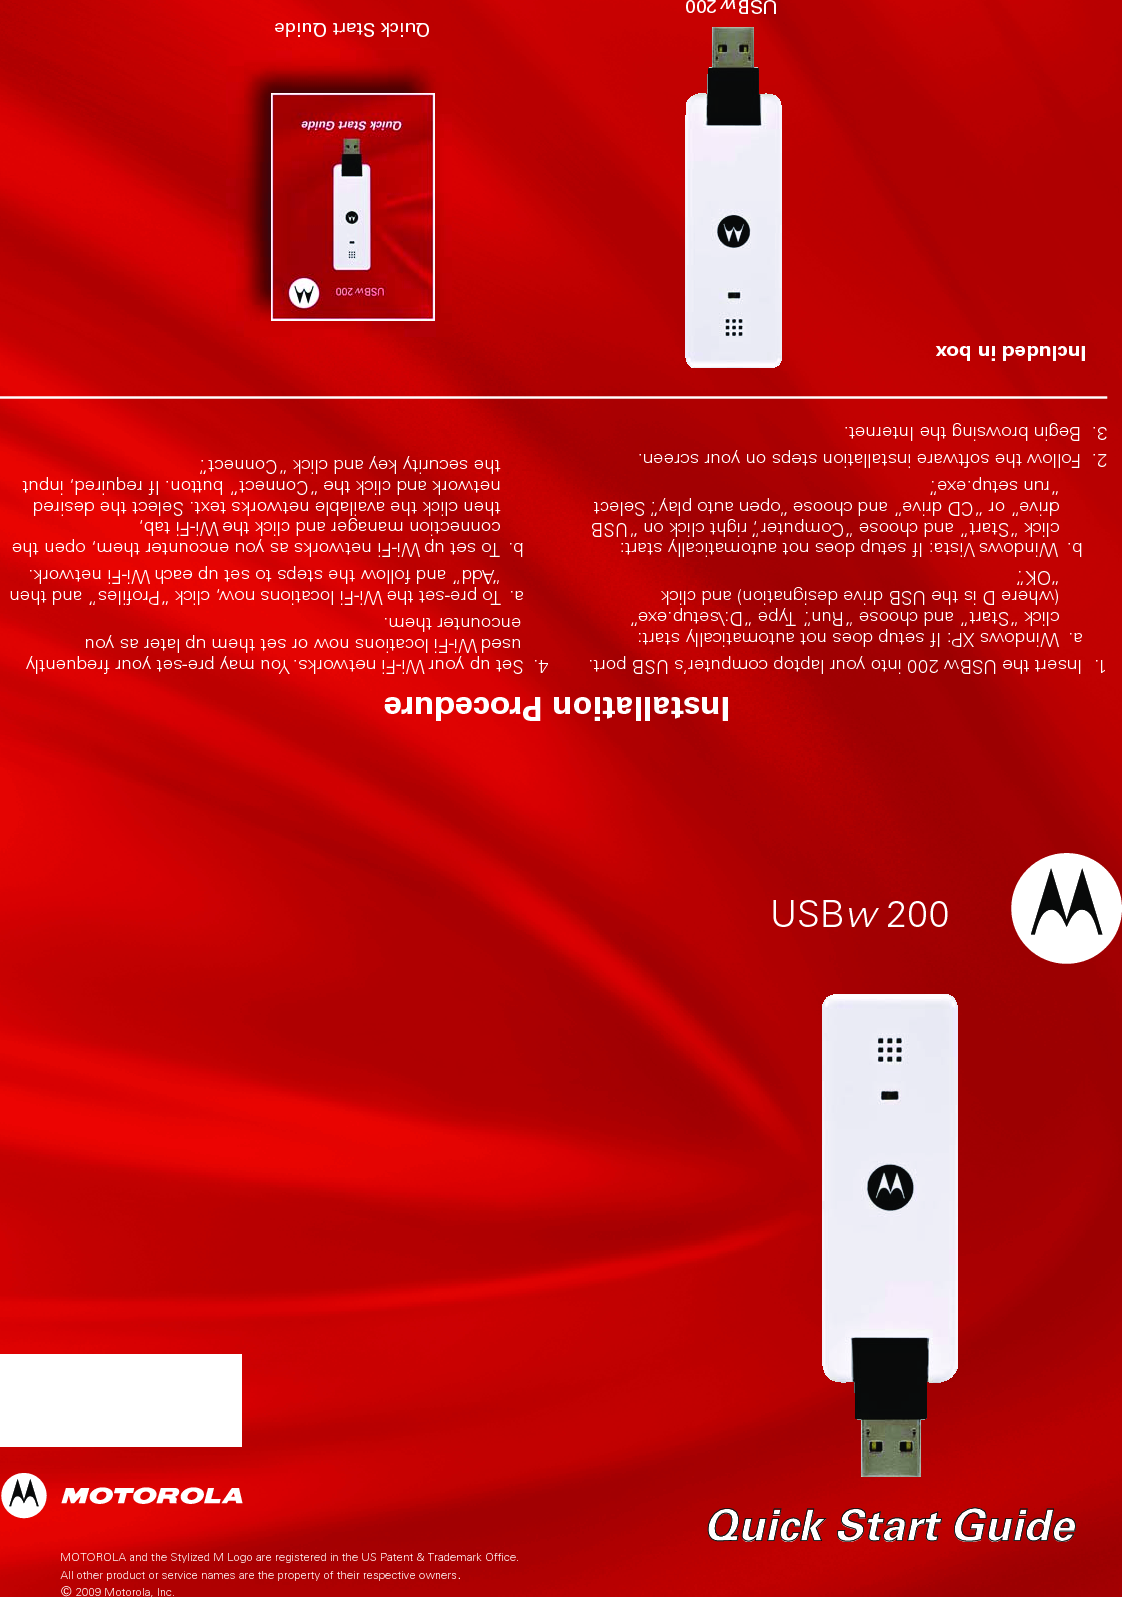 MOTOROLA and the Stylized M Logo are registered in the US Patent &amp; Trademark Office.All other product or service names are the property of their respective owners. © 2009 Motorola, Inc.USBw 200 Quick Start GuideQuick Start GuideIncluded in boxUSBw 200 Installation Procedure1.  Insert the USBw 200 into your laptop computer’s USB port.  a.  Windows XP: If setup does not automatically start:    click “Start” and choose “Run”.  Type “D:\setup.exe”    (where D is the USB drive designation) and click    “OK”.   b.  Windows Vista: If setup does not automatically start:    click “Start” and choose “Computer”, right click on “USB    drive” or “CD drive” and choose “open auto play”. Select    “run setup.exe”.2.  Follow the software installation steps on your screen.3.  Begin browsing the Internet.4.  Set up your Wi-Fi networks. You may pre-set your frequently used Wi-Fi locations now or set them up later as you encounter them.   a.  To pre-set the Wi-Fi locations now, click “Proﬁles” and then    “Add” and follow the steps to set up each Wi-Fi network.  b.  To set up Wi-Fi networks as you encounter them, open the    connection manager and click the Wi-Fi tab,    then click the available networks text. Select the desired     network and click the “Connect” button. If required, input     the security key and click “Connect”.Quick Start Quide